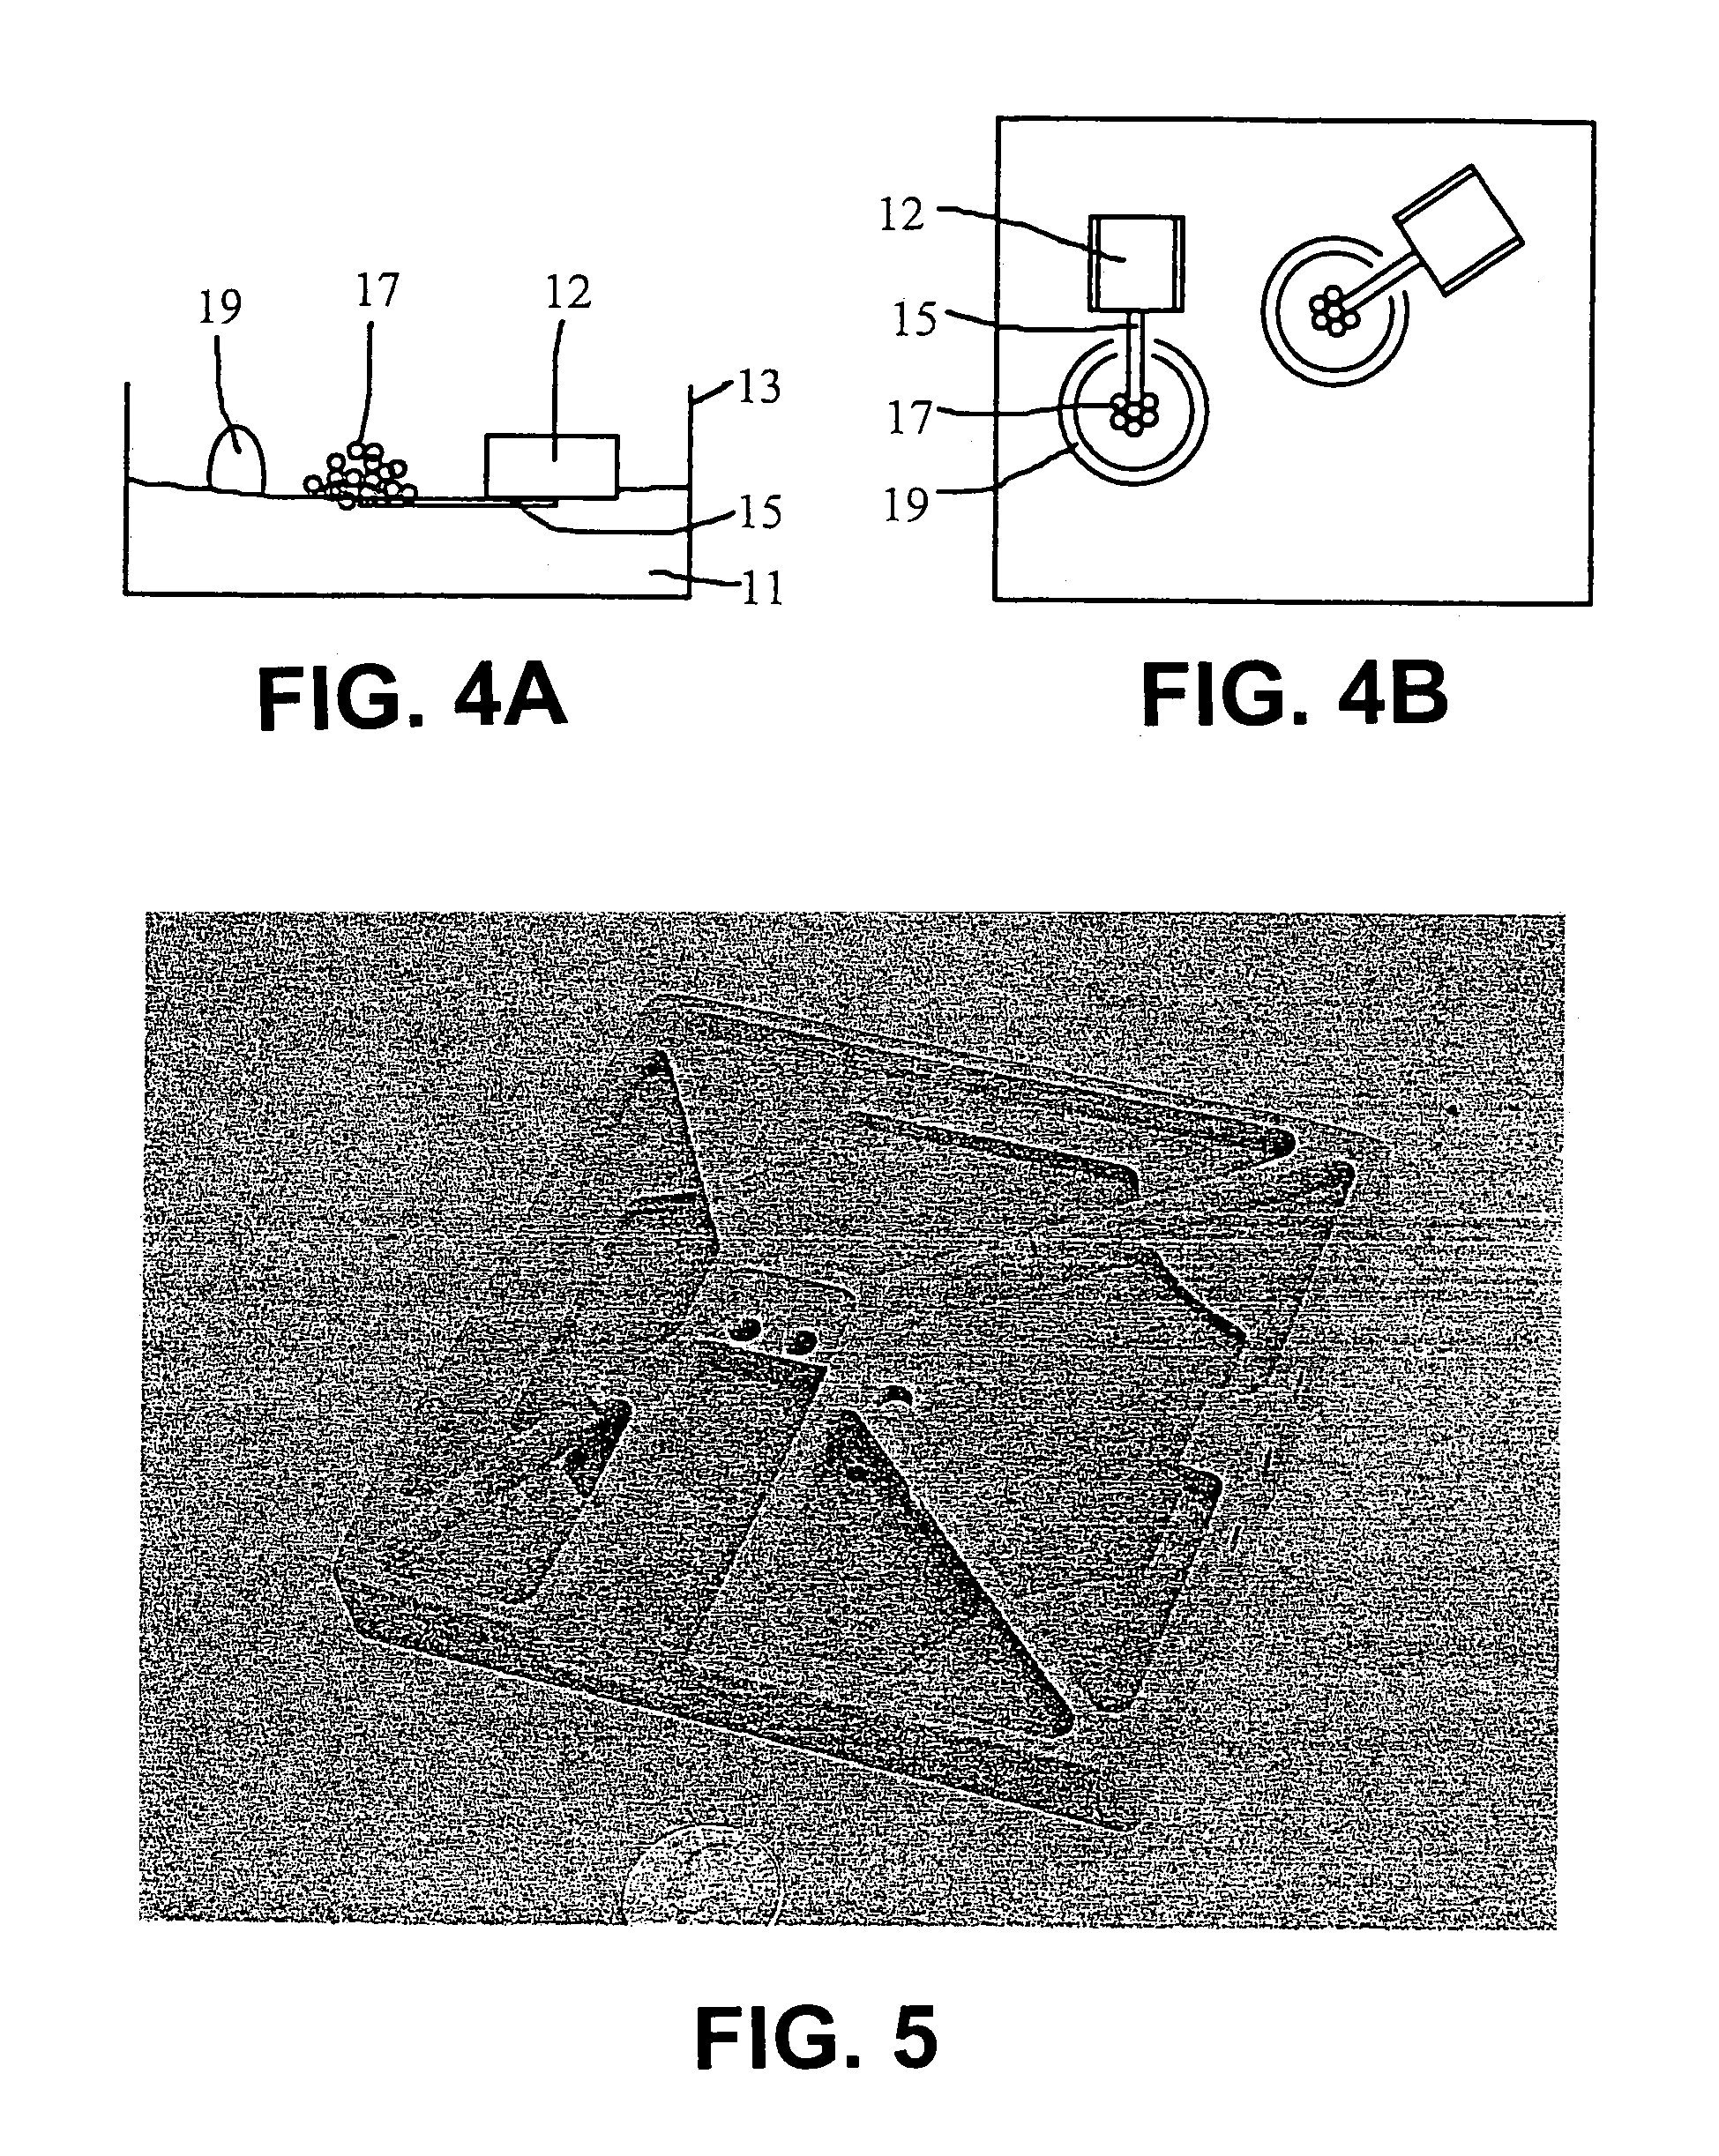 Silicon-containing composite bodies, and methods for making same